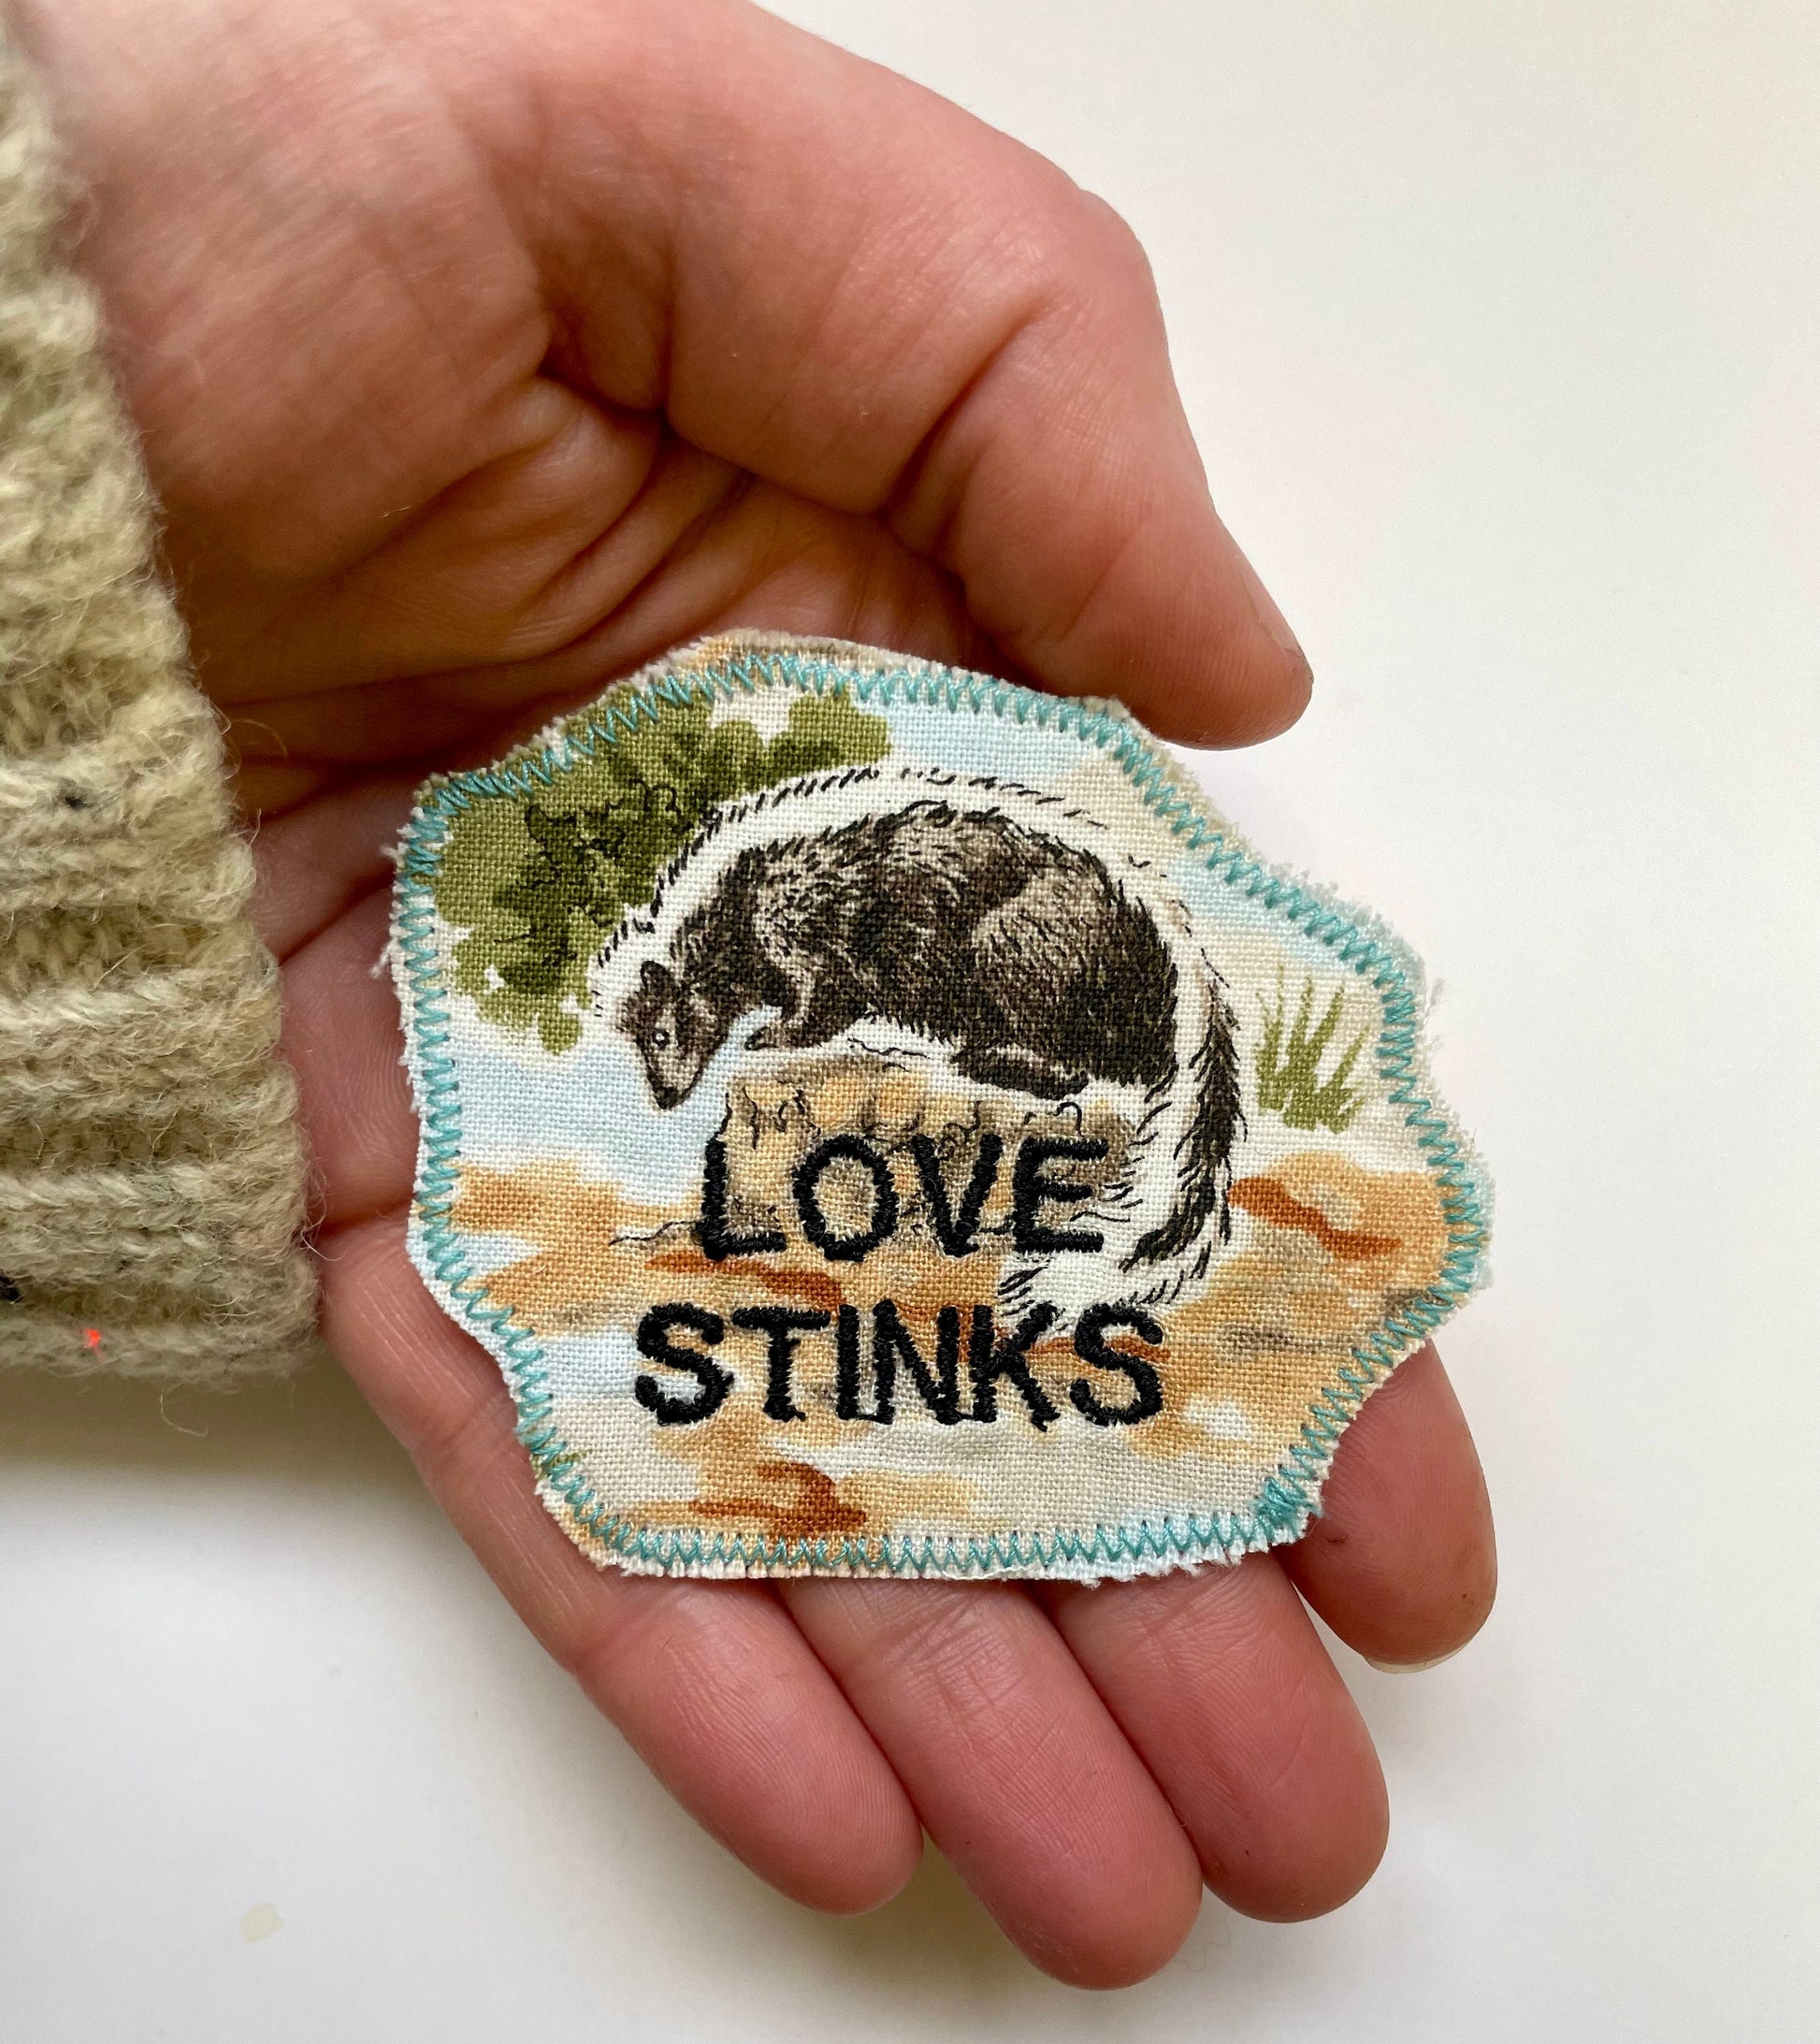 a hand holding a patch with a picture of a bear on it